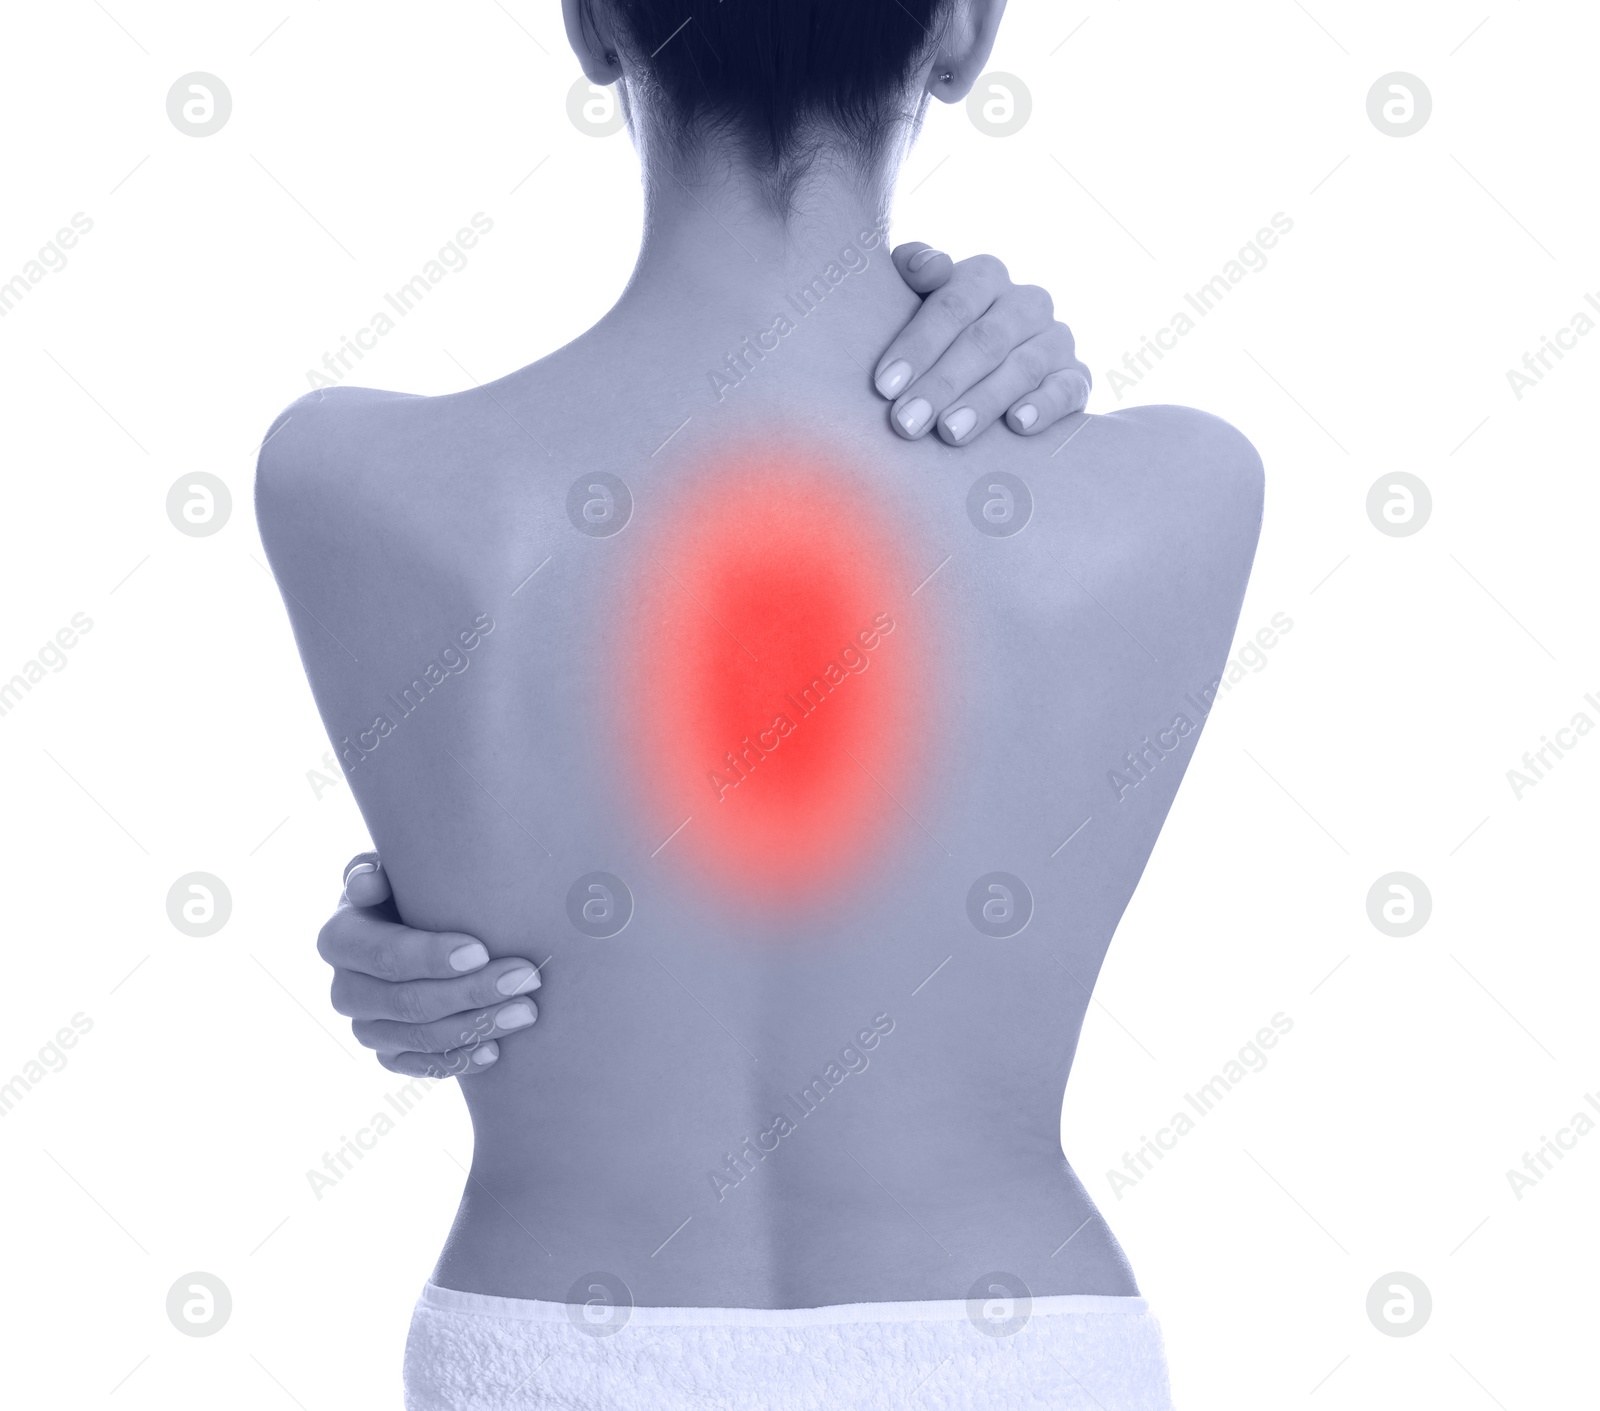 Image of Woman suffering from back pain on white background